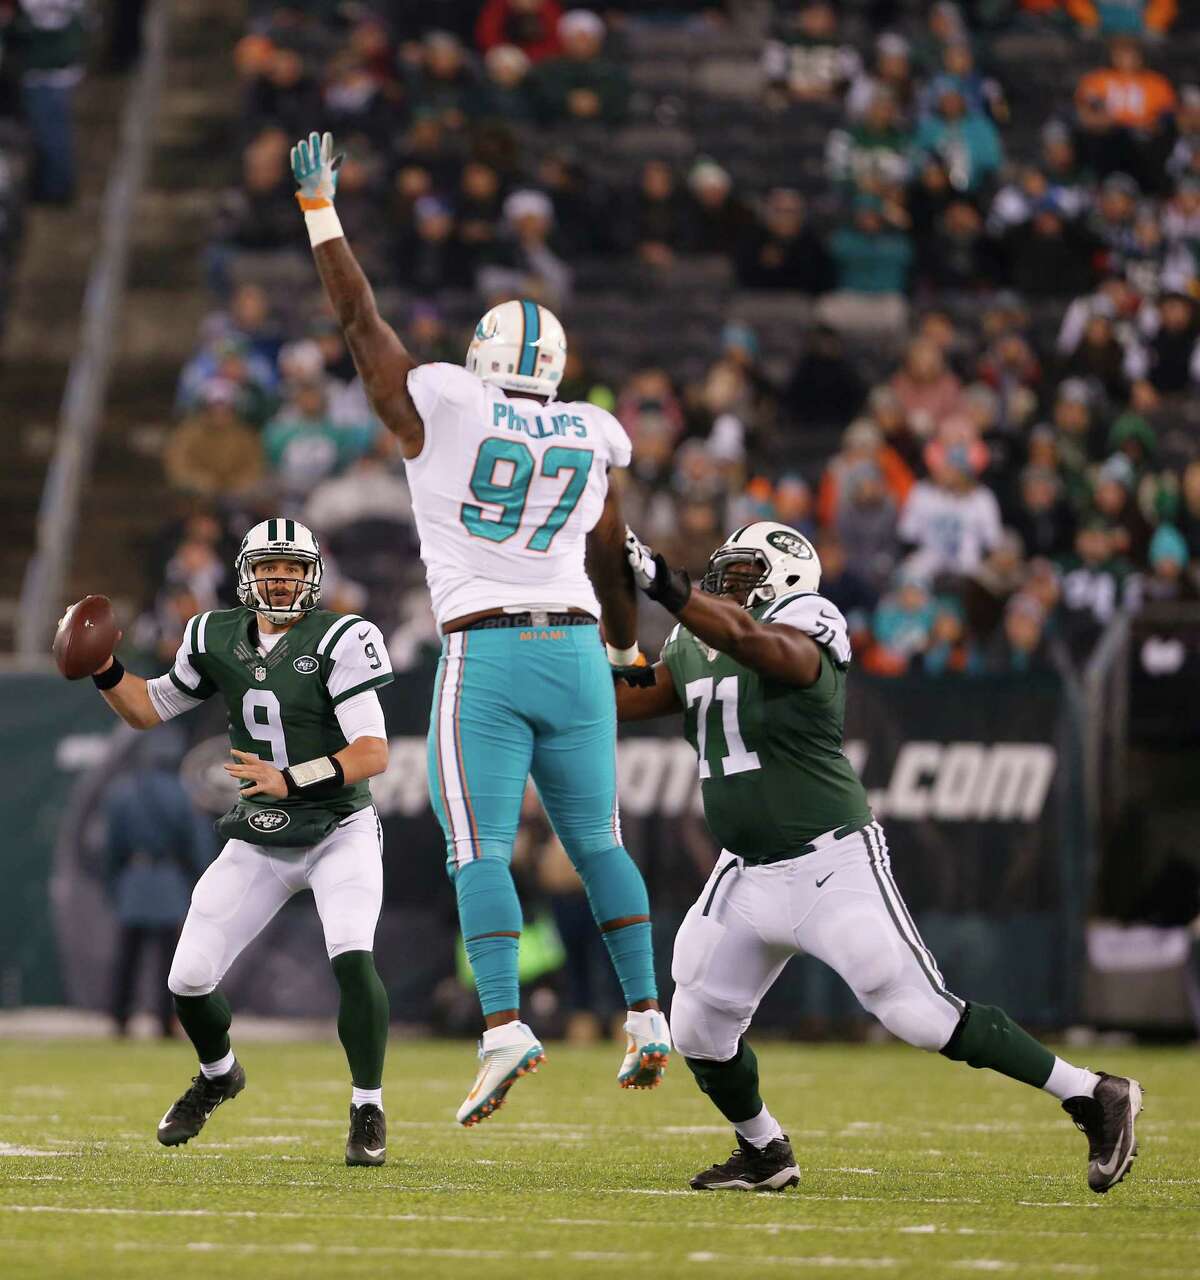 New York Jets quarterback Bryce Petty (9) throws against the Miami Dolphins during the first quarter of an NFL football game, Saturday, Dec. 17, 2016, in East Rutherford, N.J. (AP Photo/Adam Hunger)